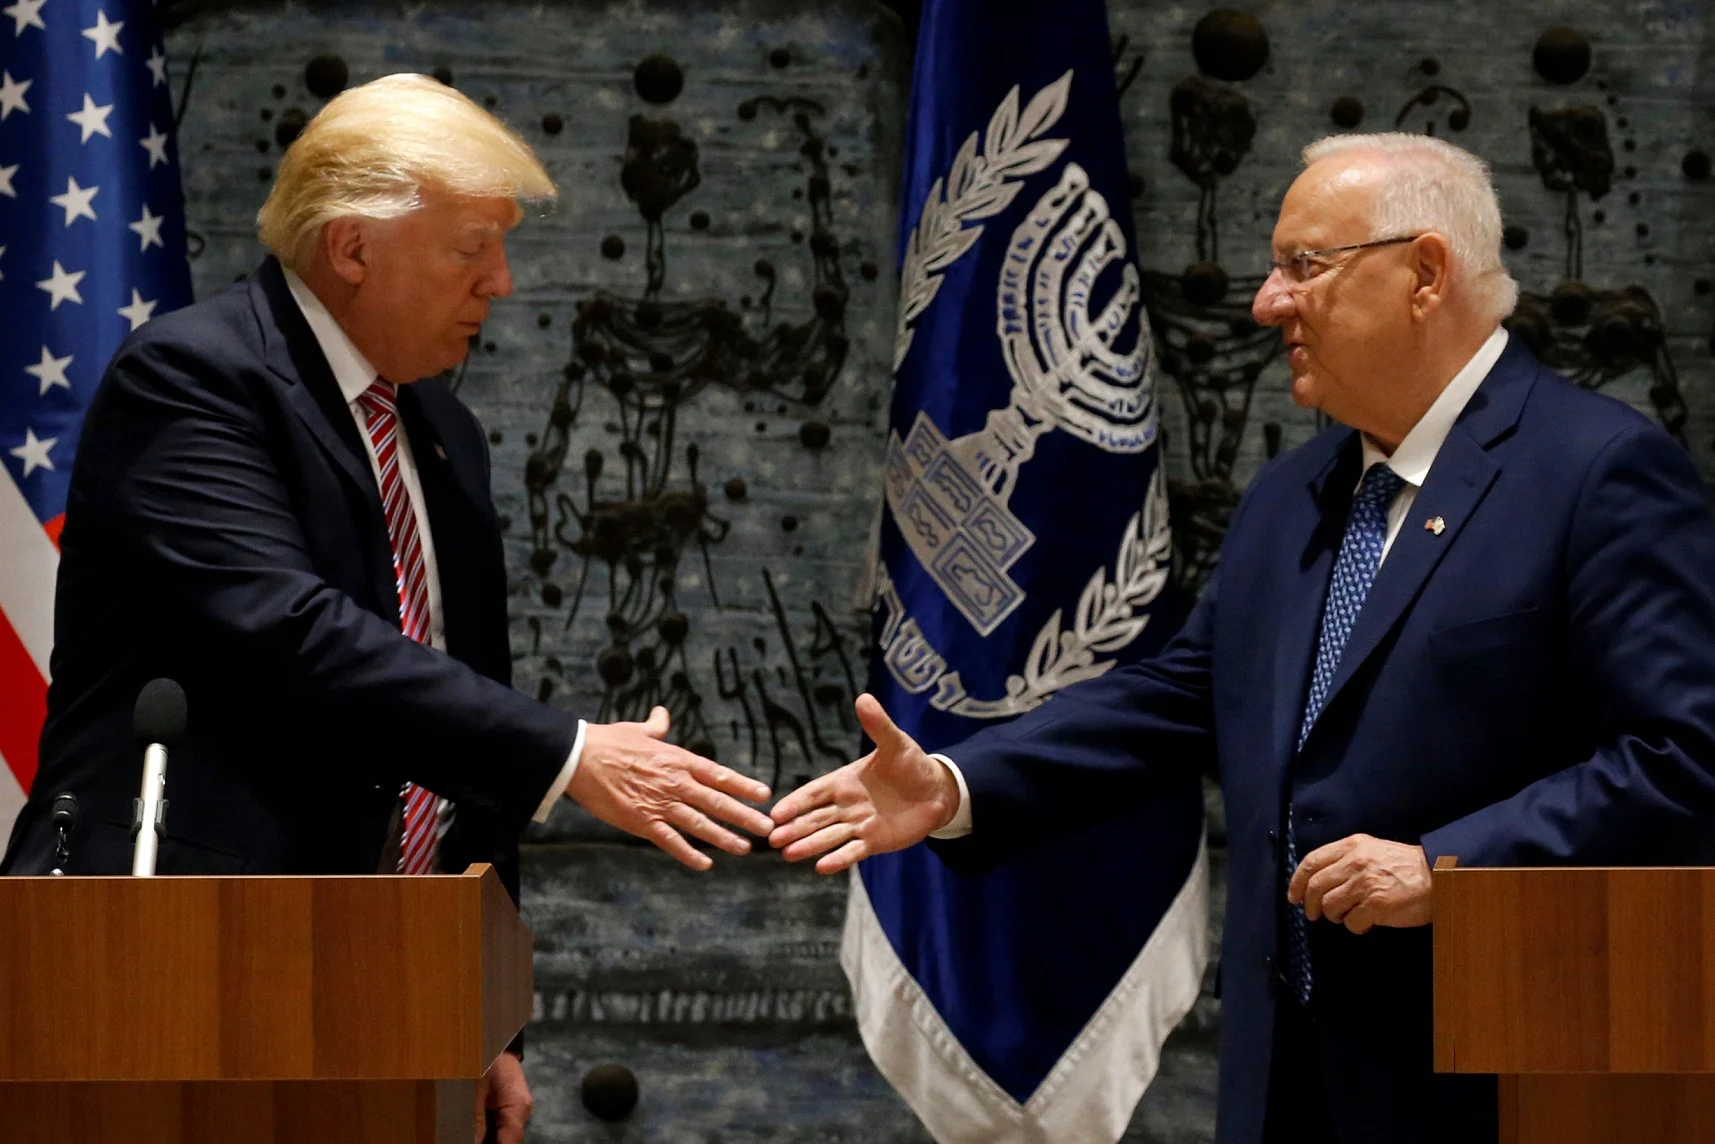 Trump And Rivlin Shake Hands After Delivering Remarks At Rivlin's Residence In Jerusalem